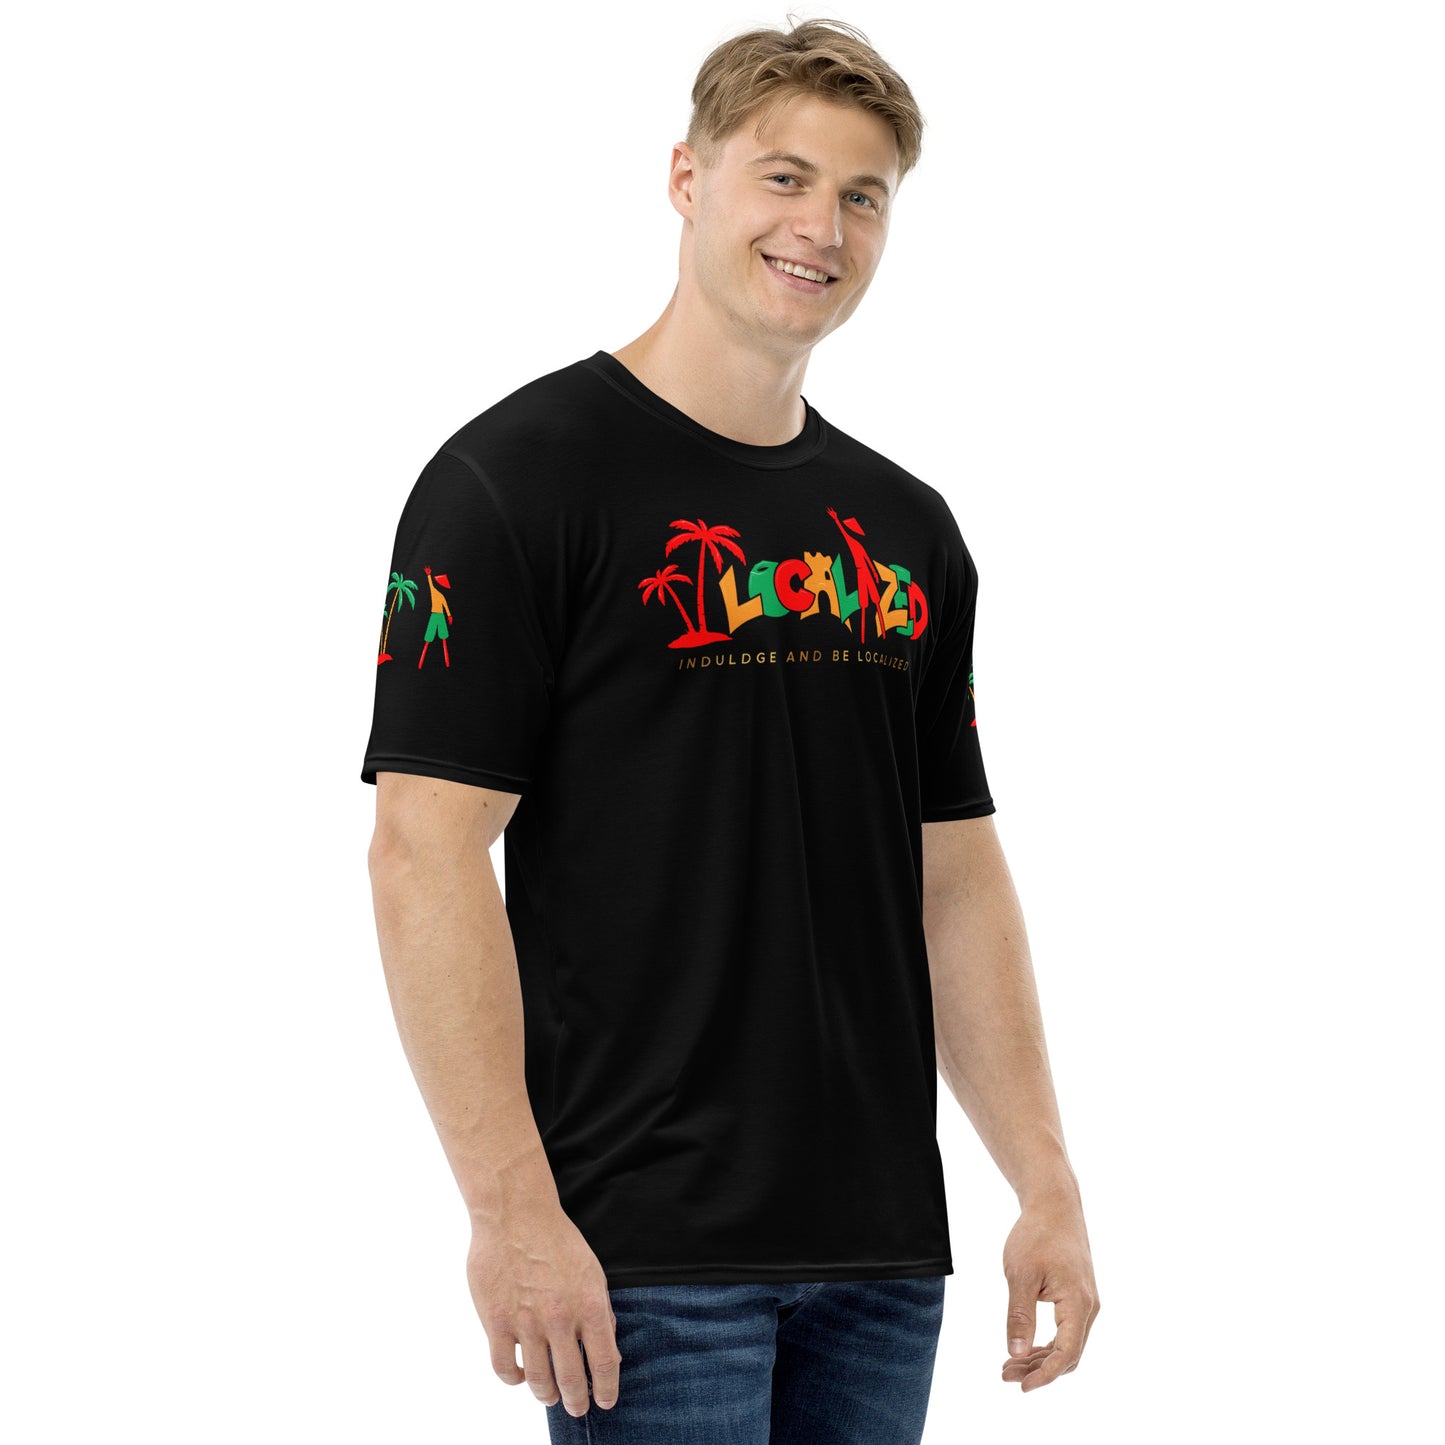 Black V.Localized (Ice/Green/Gold) Dry-Fit Mens T-Shirt